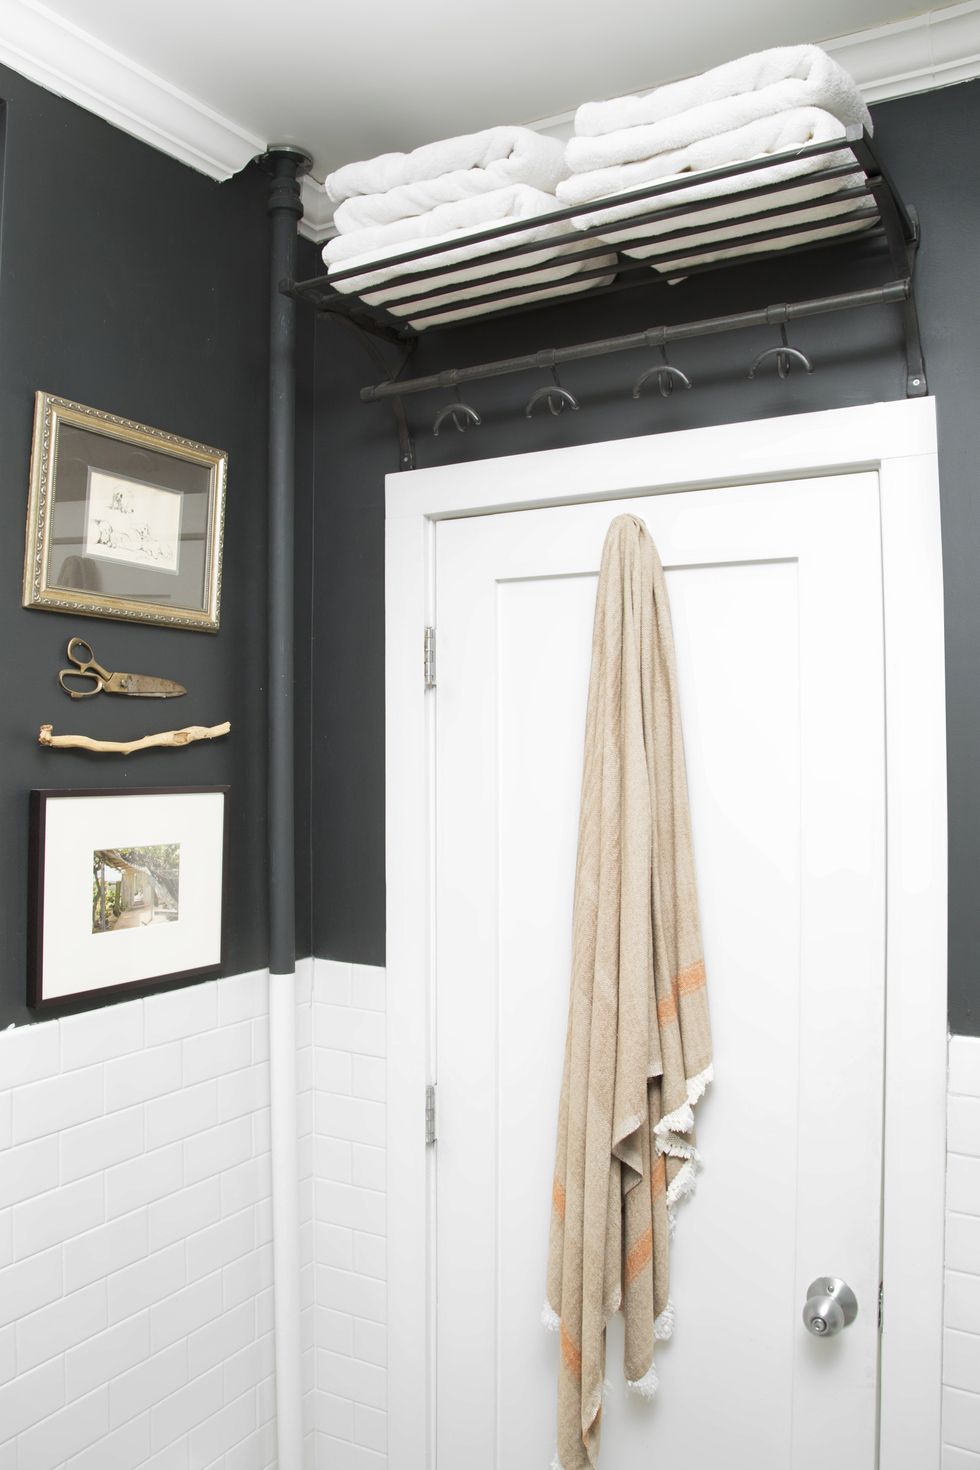 bathroom shelf ideas, bathroom with charcoal painted walls and towels on a shelf above the door